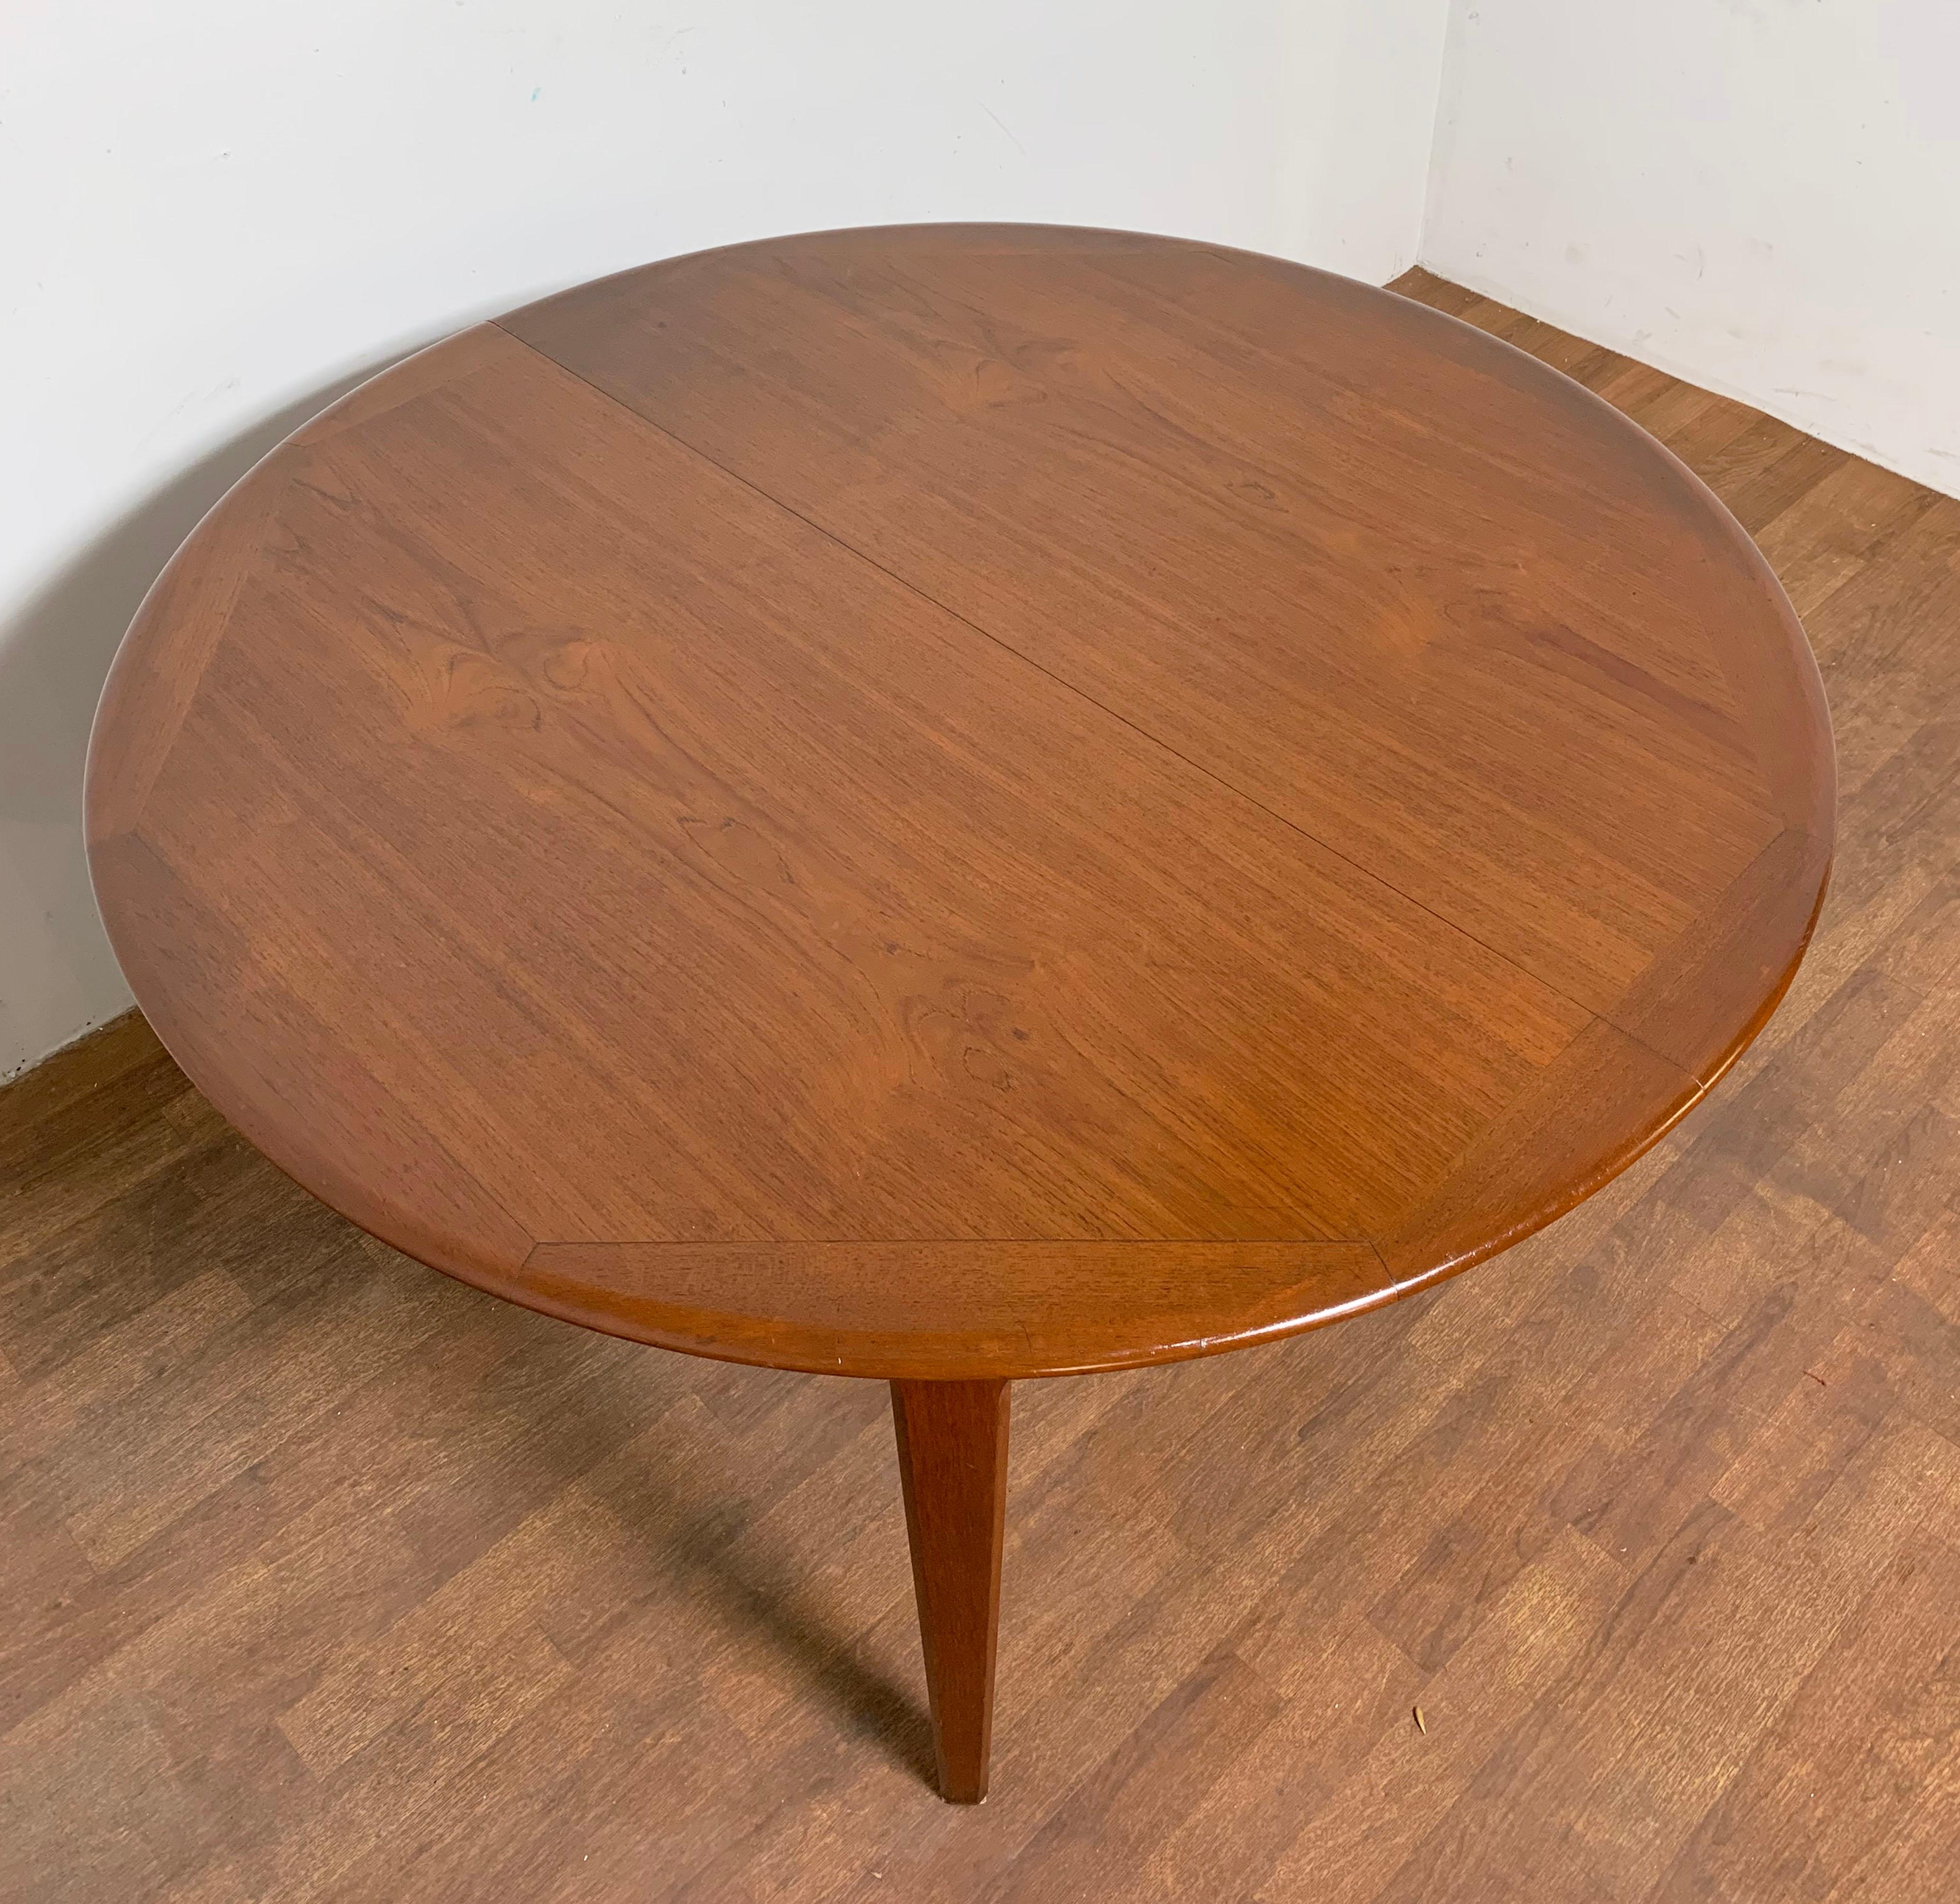 Danish round teak dining table with two leaves (19 5/8